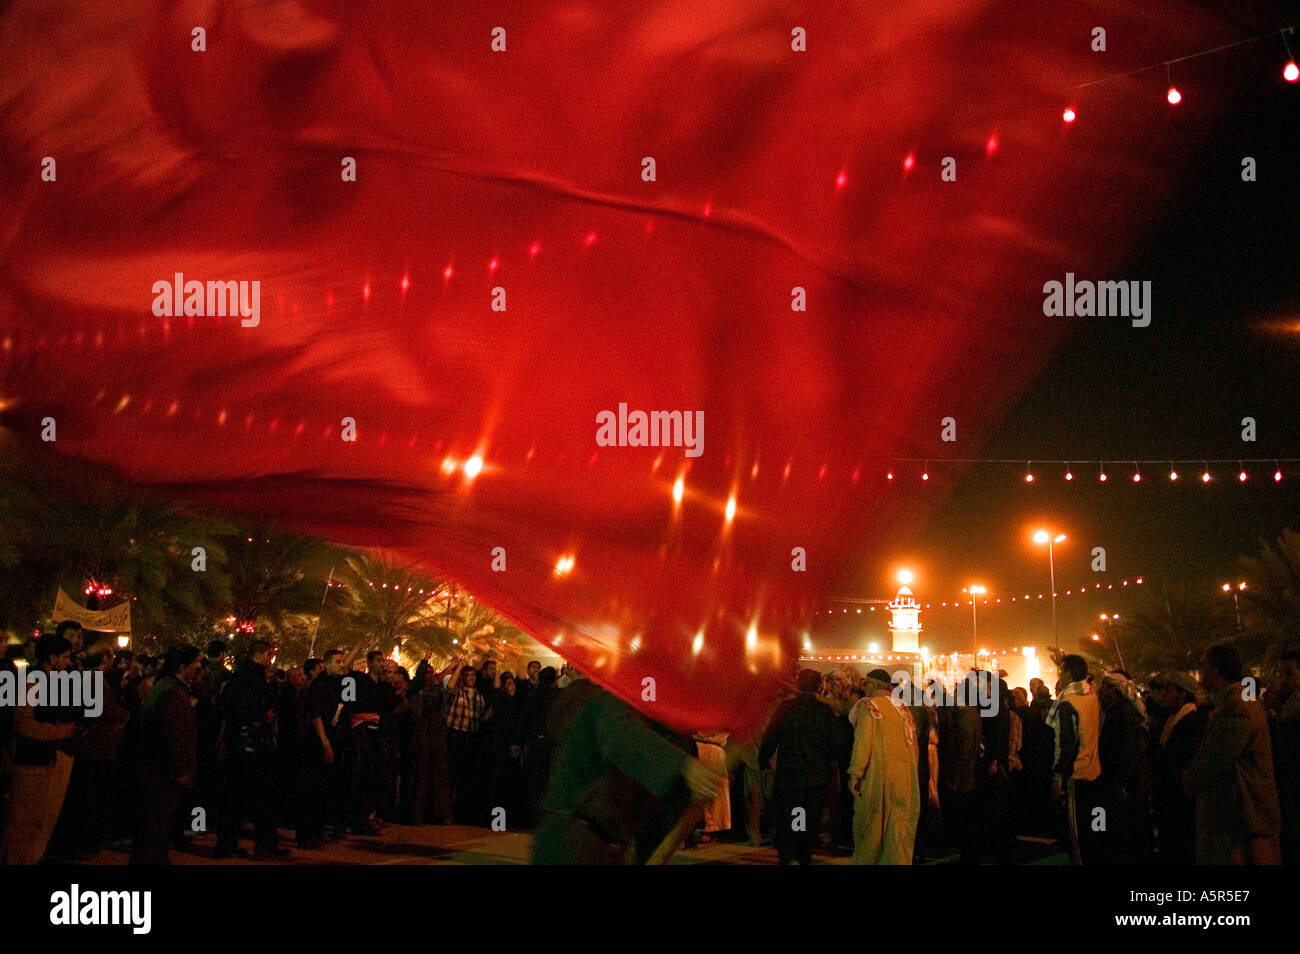 Flags in the air on Ashura's eve Karbala 01.03.04 Iraq Stock Photo